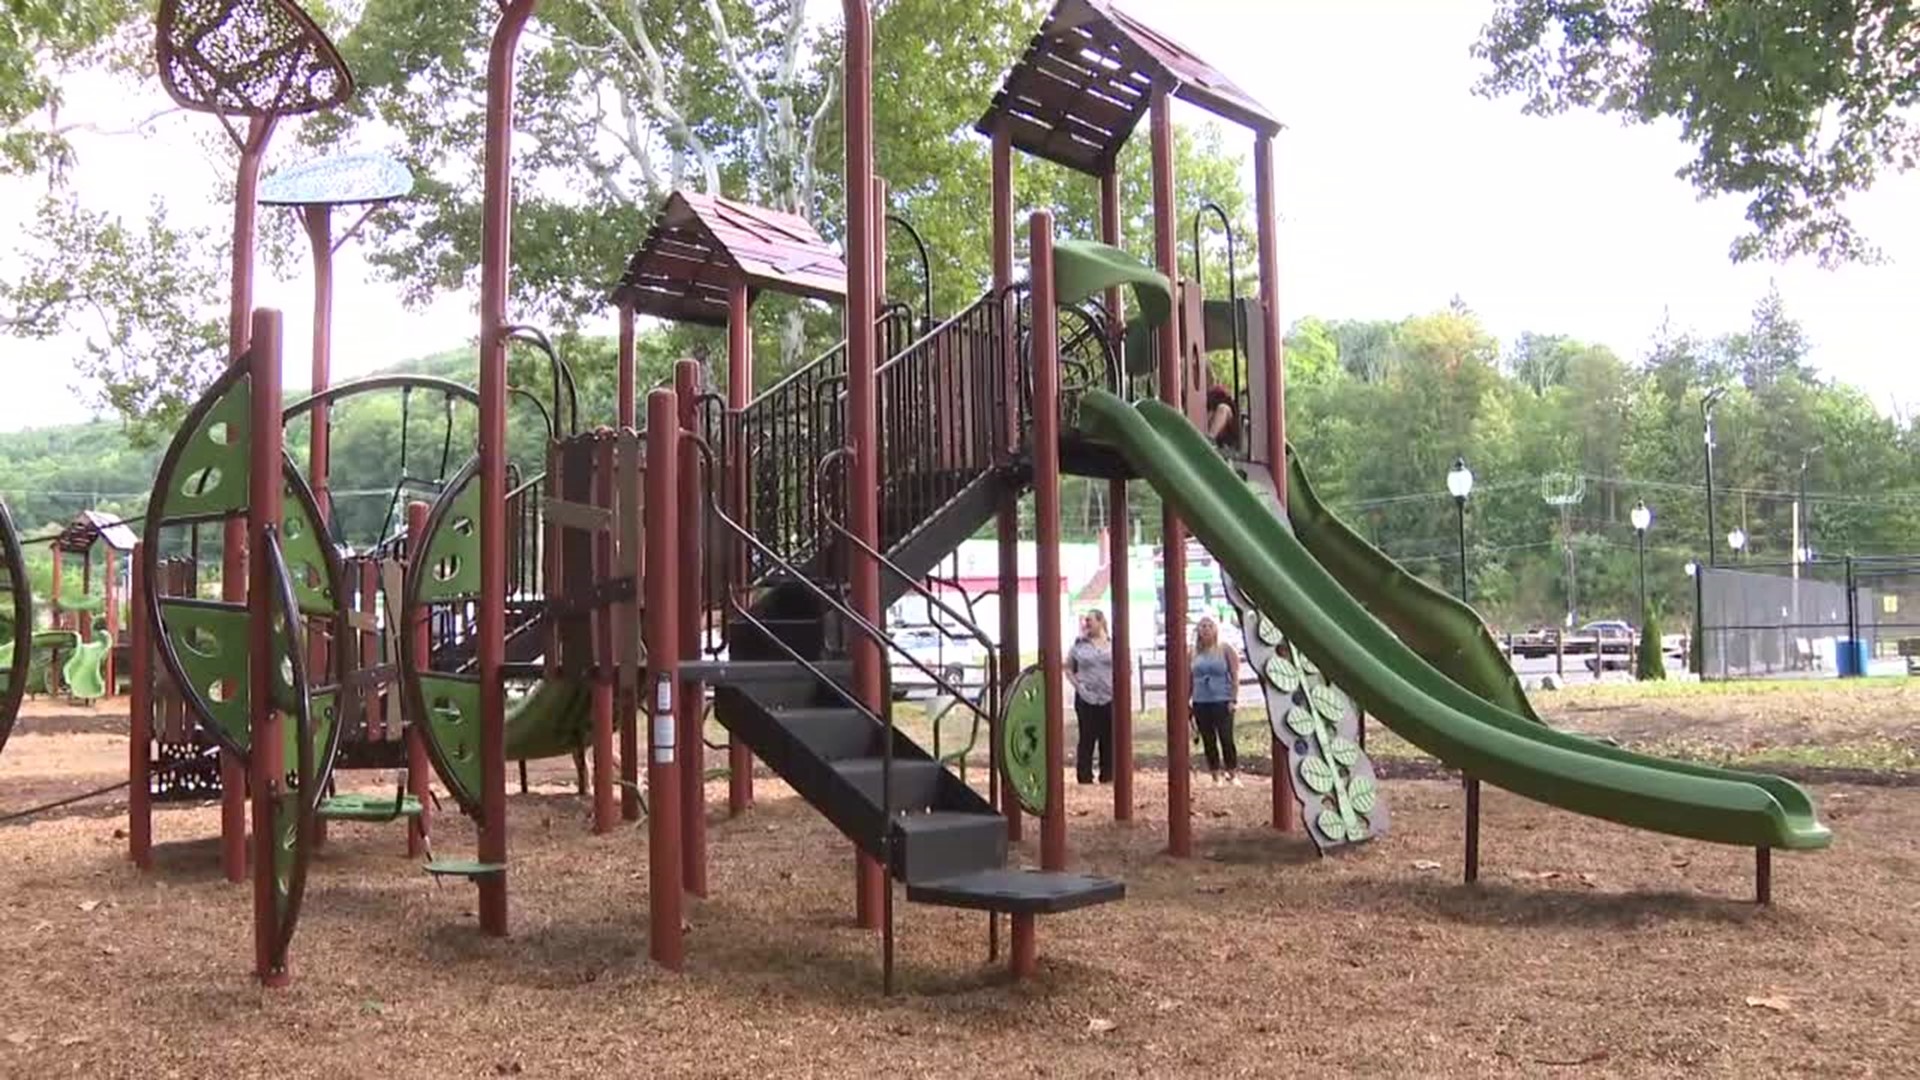 A playground in the Poconos has reopened after getting a major facelift. And even more improvements are in the works.